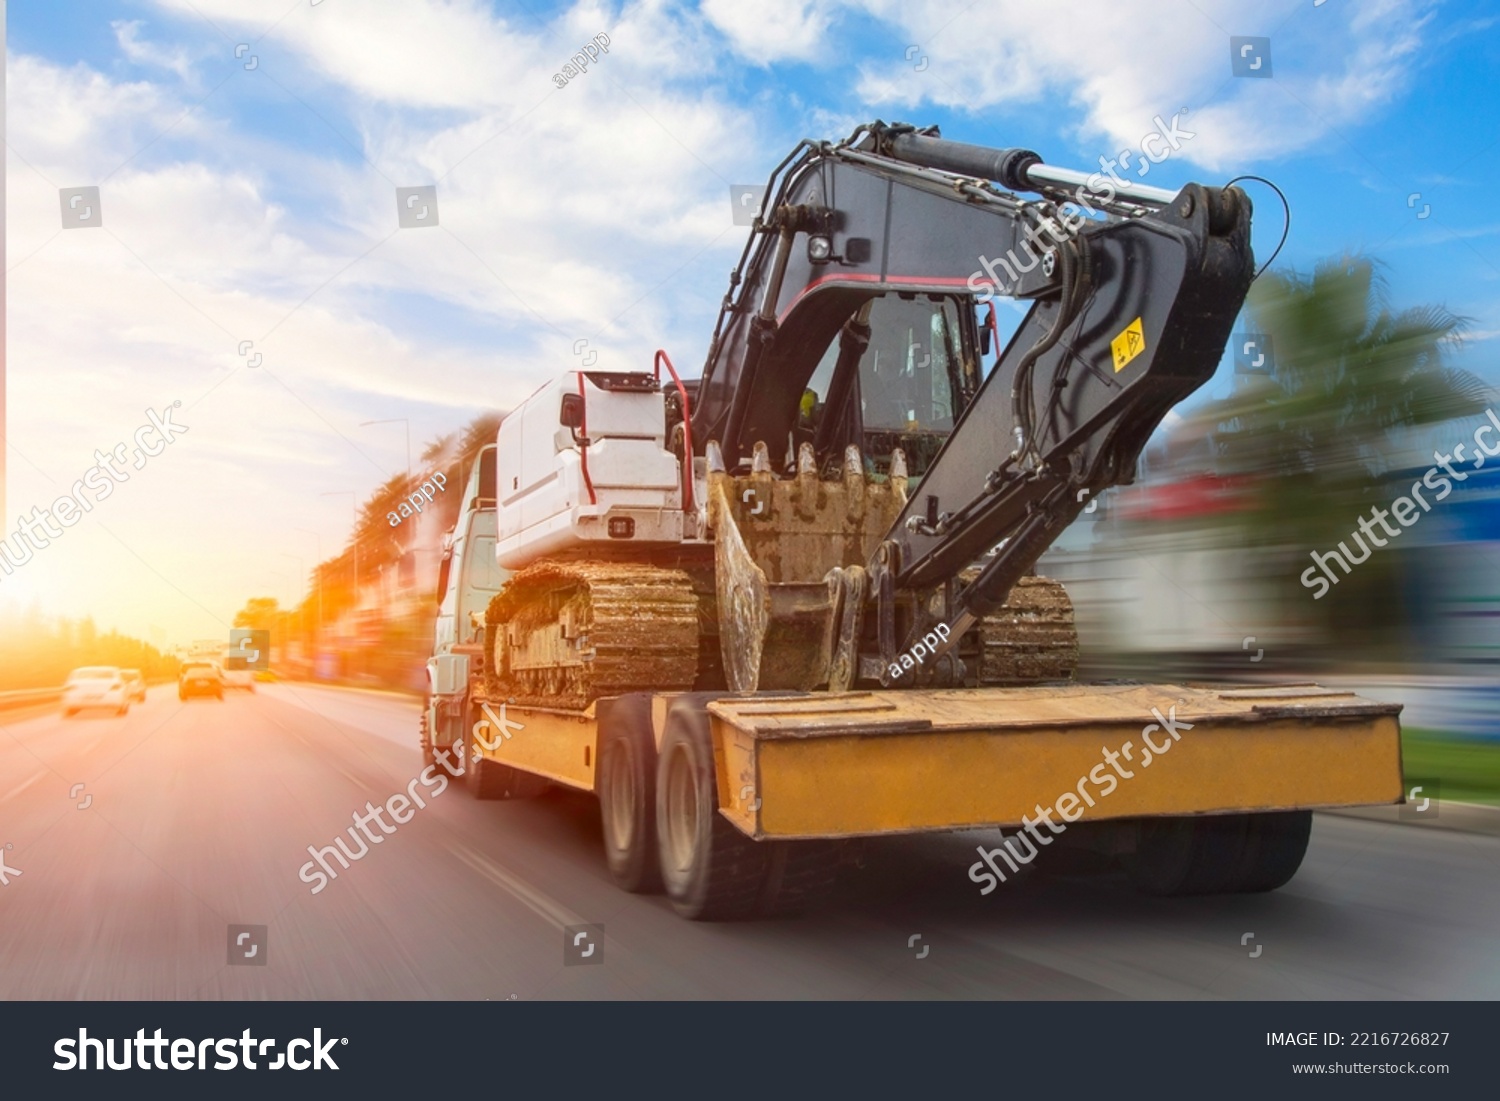 Transportation of a dirty excavator on a truck trailer after its work. Motion speed and blur effect on city highway, during sunset sky #2216726827